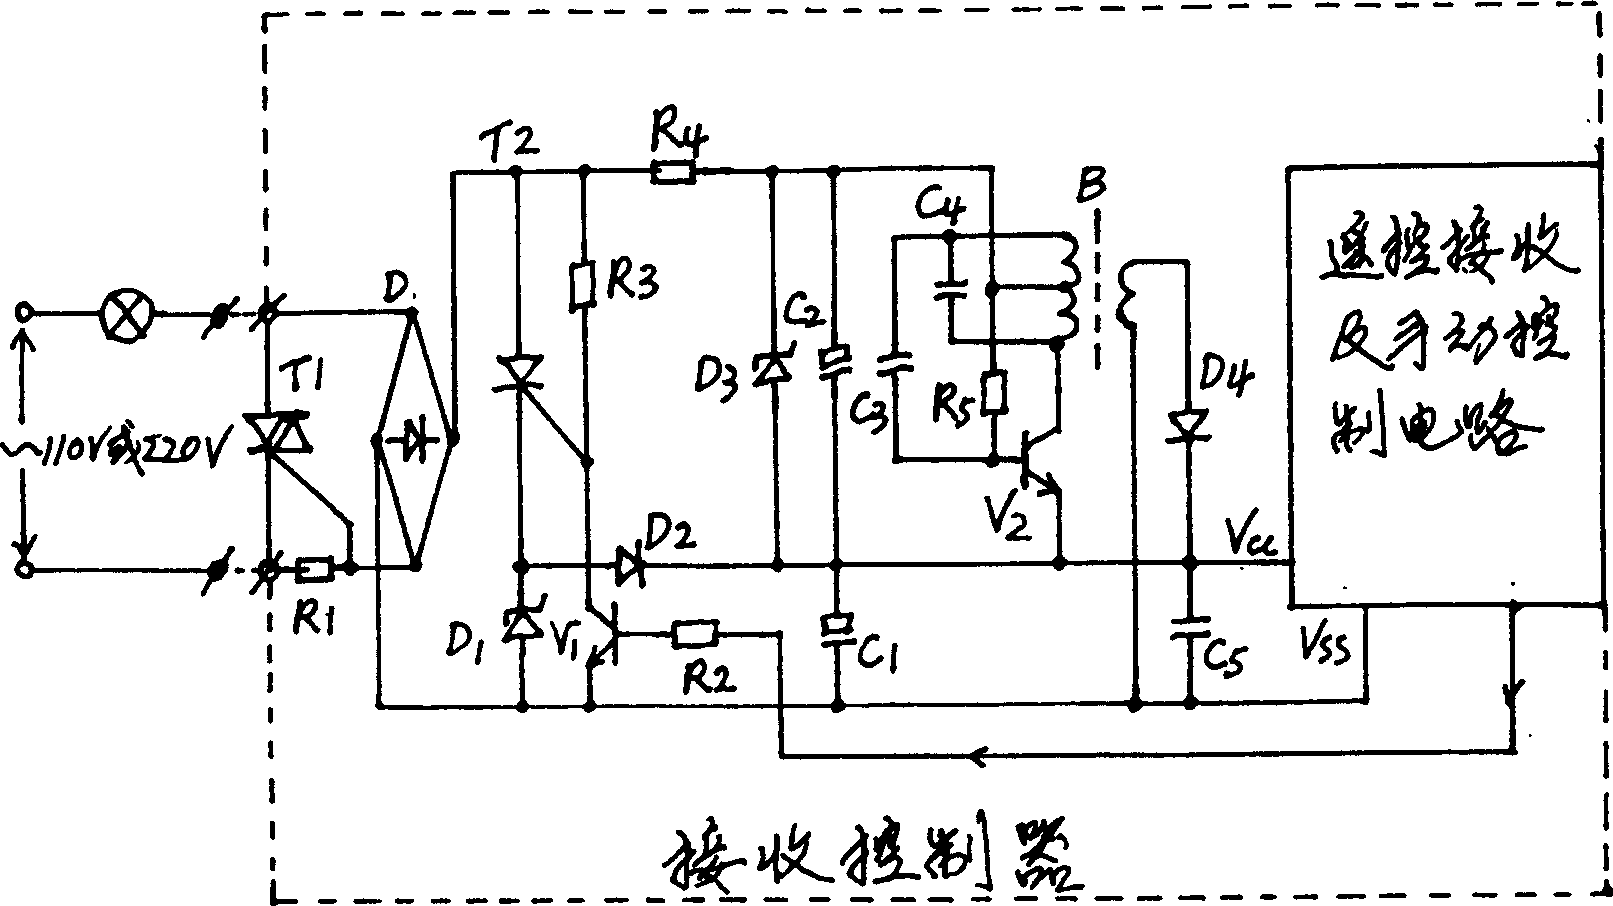 Tandem type remote controller employing switching power supply